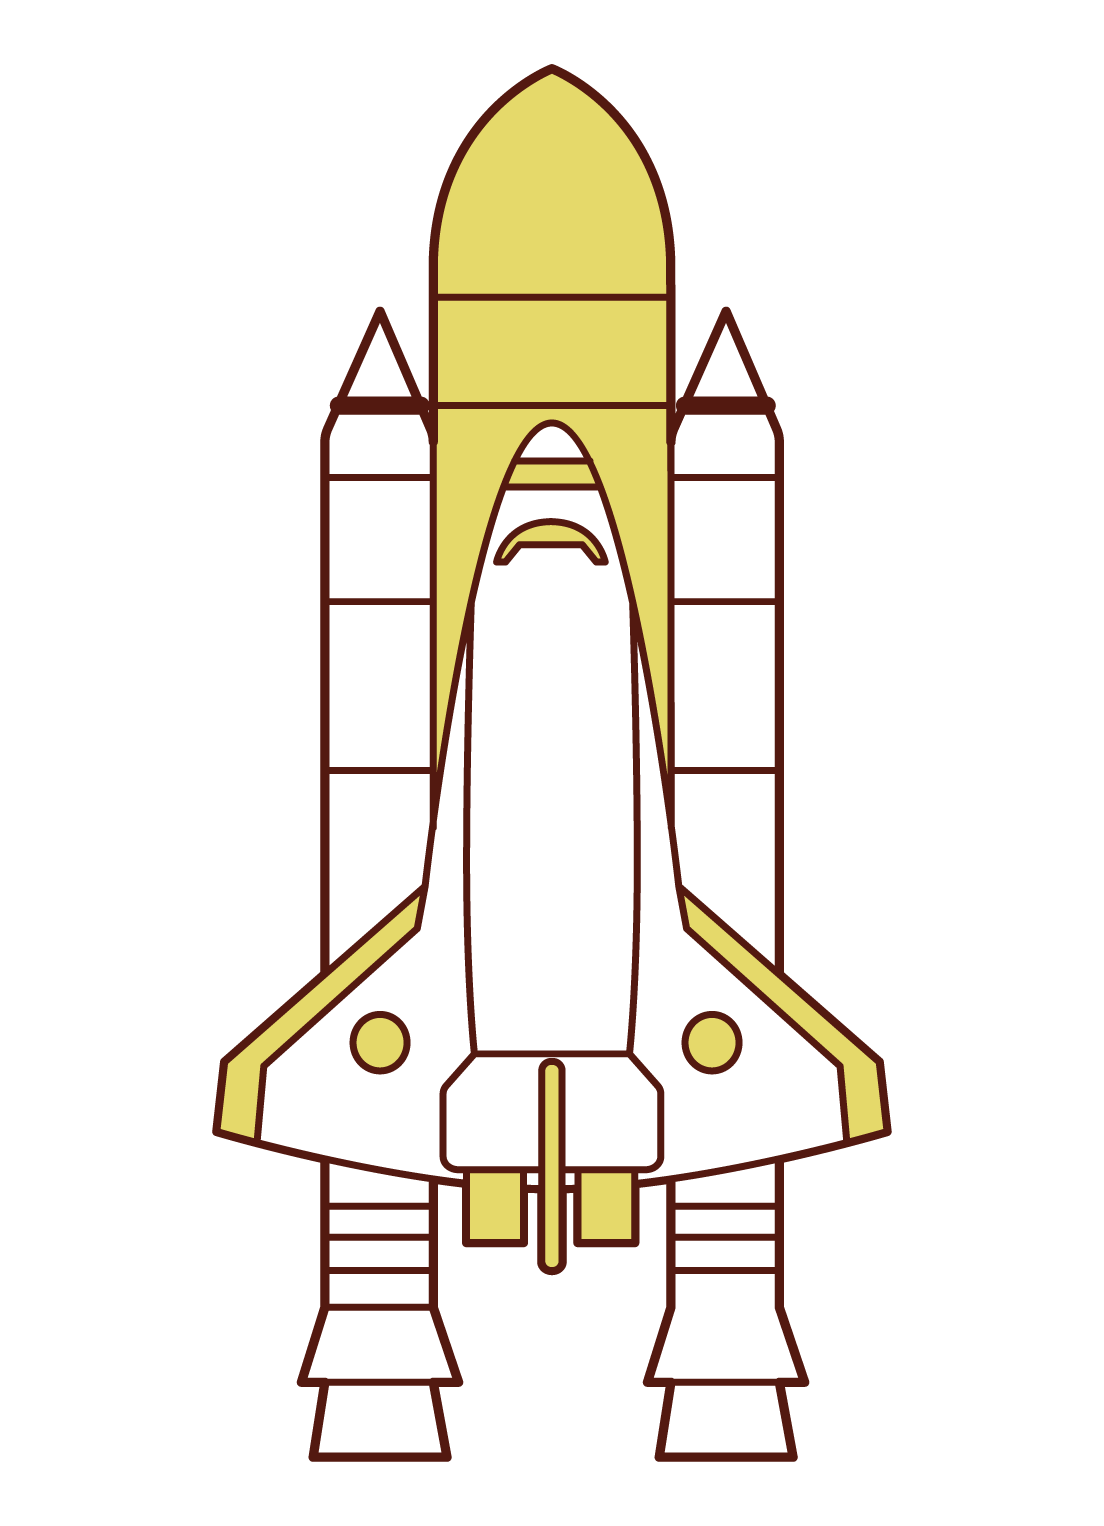 Illustration of the Space Shuttle